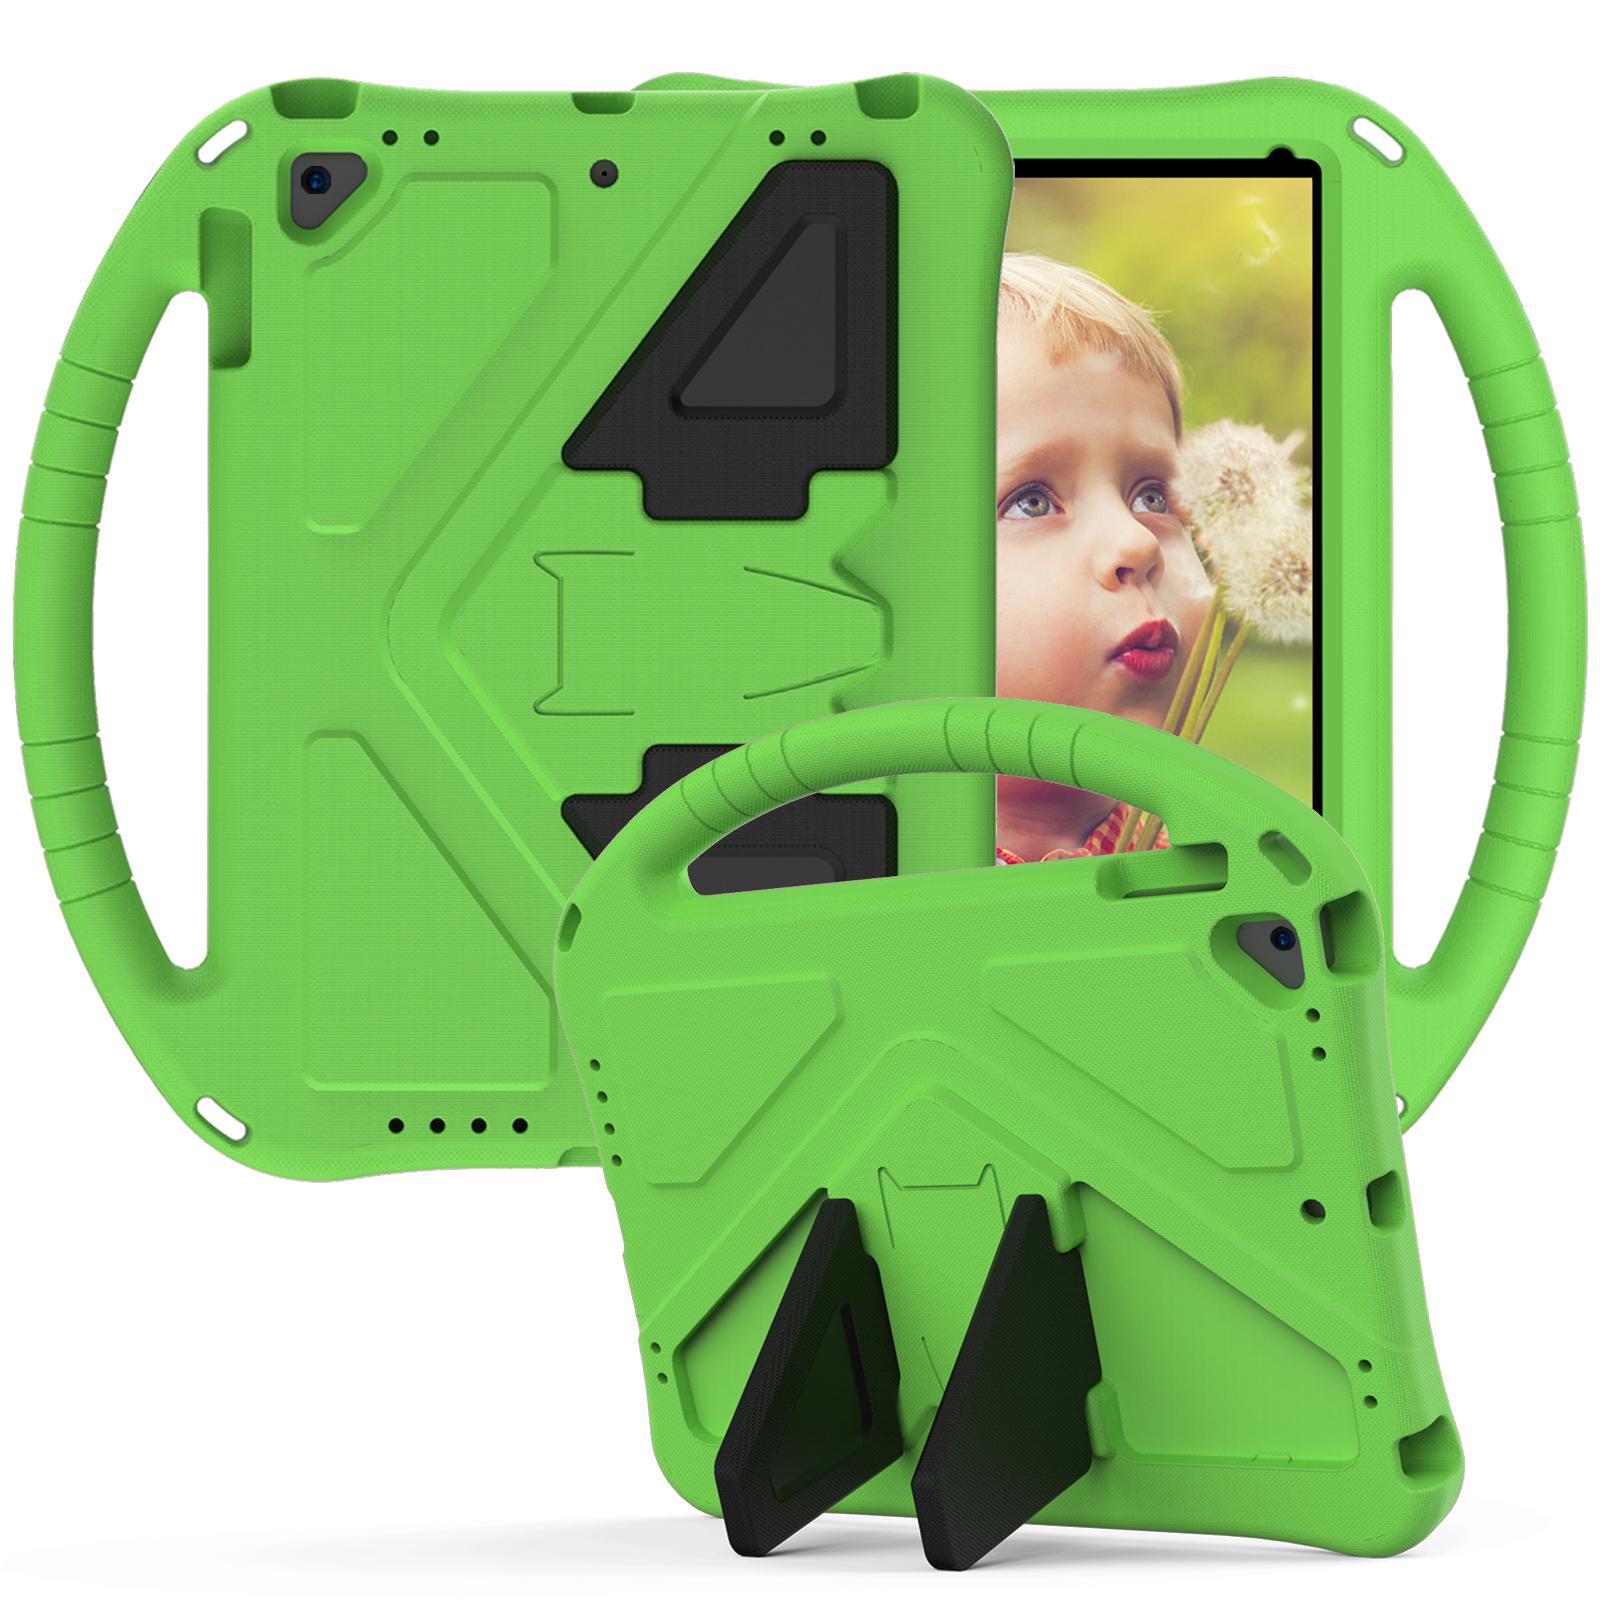 MCC Kids iPad Air 1 (1st Gen) Case Cover Apple Shockproof Air1 Wing [Green]